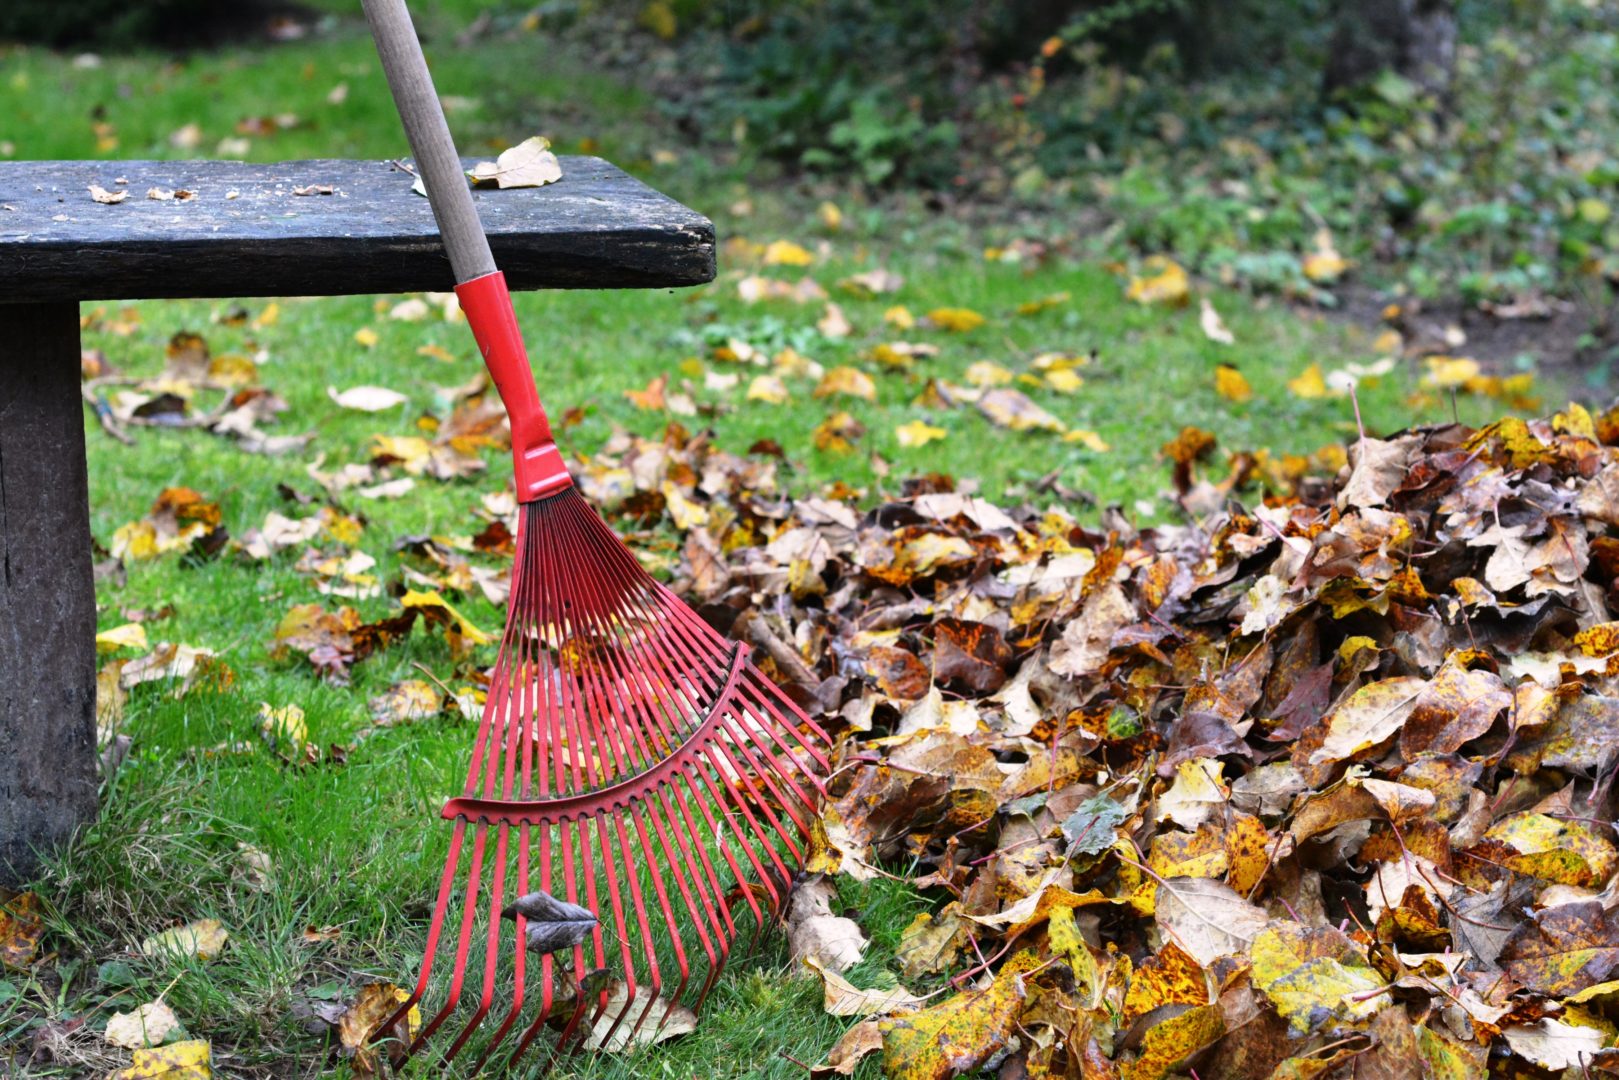 Rake leaves: first step to prep your lawn this fall